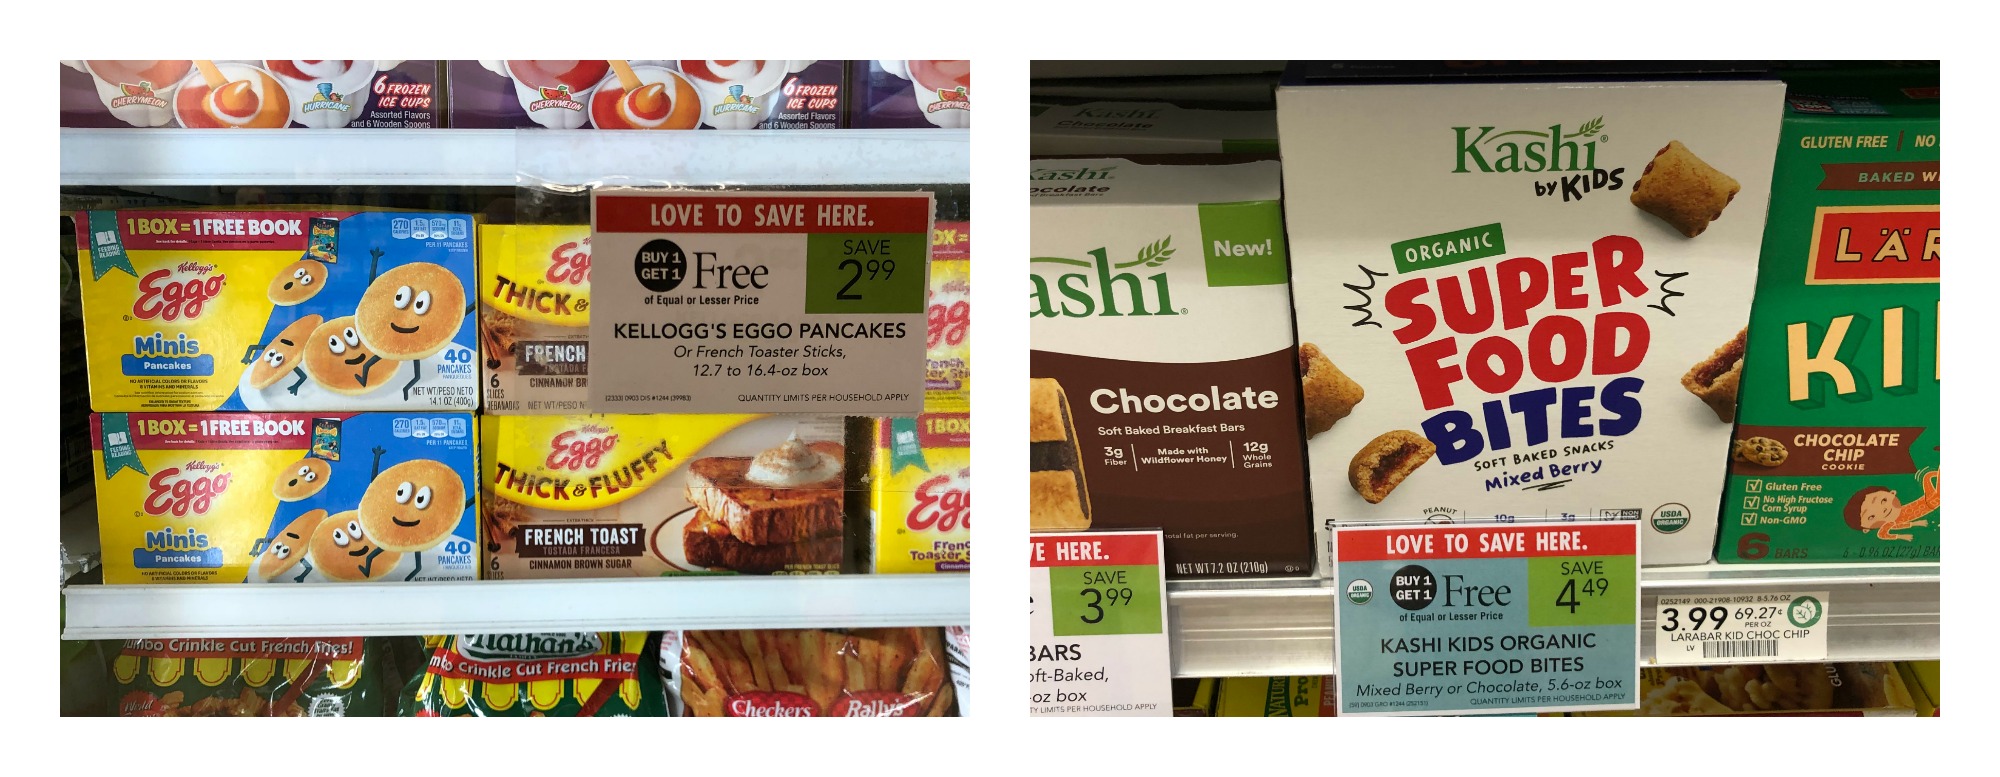 Publix Deals That Correspond With The Kellogg's Feeding Reading Program...Great Prices + Free Books! on I Heart Publix 1